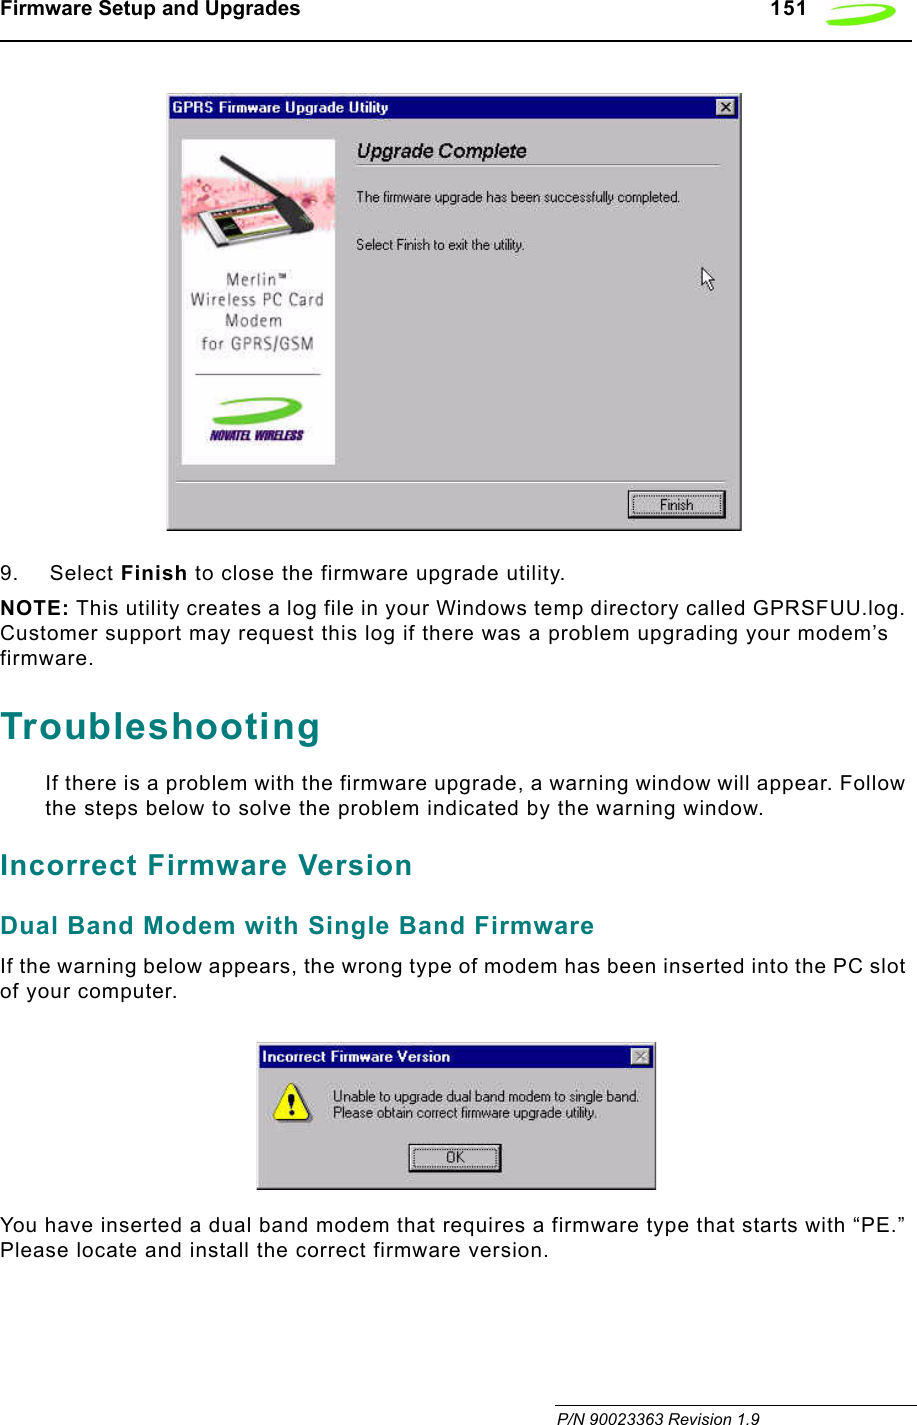 Firmware Setup and Upgrades   151 P/N 90023363 Revision 1.99. Select Finish to close the firmware upgrade utility.NOTE: This utility creates a log file in your Windows temp directory called GPRSFUU.log. Customer support may request this log if there was a problem upgrading your modem’s firmware.TroubleshootingIf there is a problem with the firmware upgrade, a warning window will appear. Follow the steps below to solve the problem indicated by the warning window.Incorrect Firmware VersionDual Band Modem with Single Band FirmwareIf the warning below appears, the wrong type of modem has been inserted into the PC slot of your computer. You have inserted a dual band modem that requires a firmware type that starts with “PE.” Please locate and install the correct firmware version.